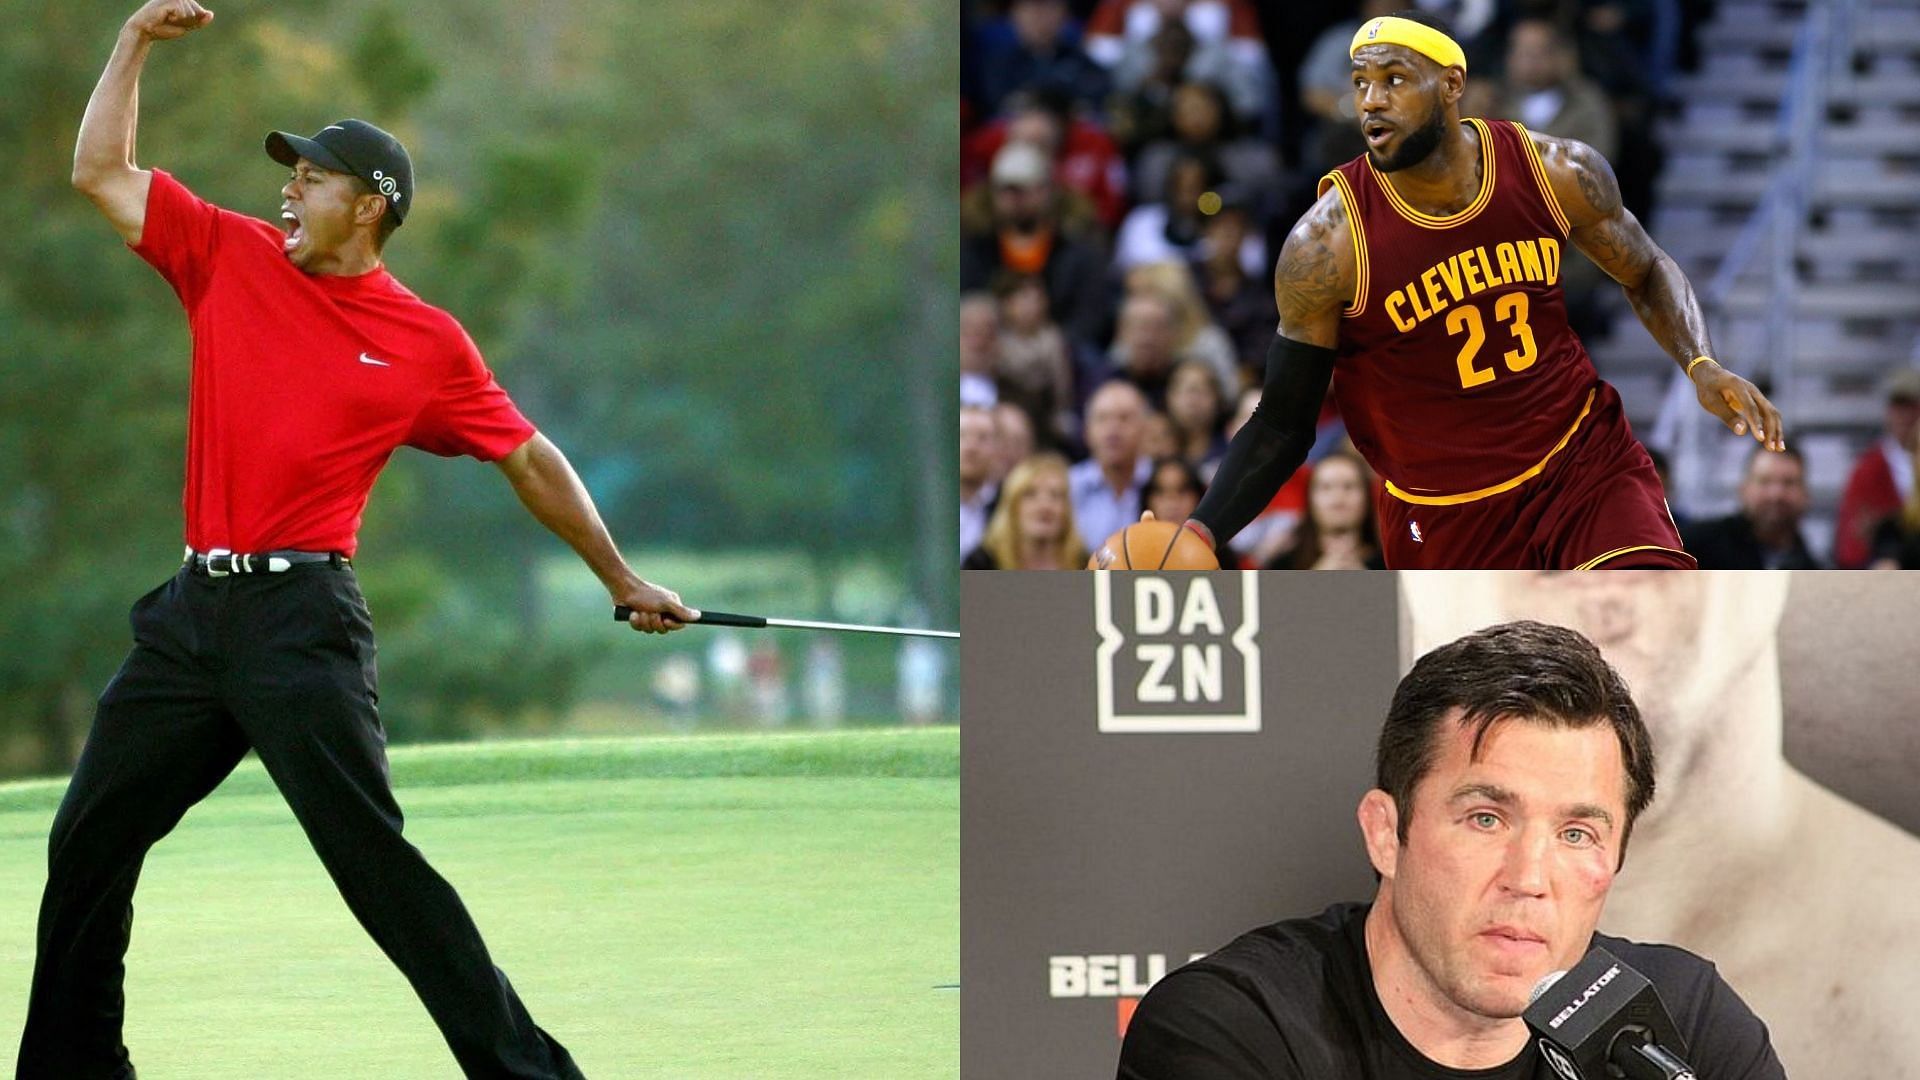 Lebron James, Tiger Woods and Chael Sonnen